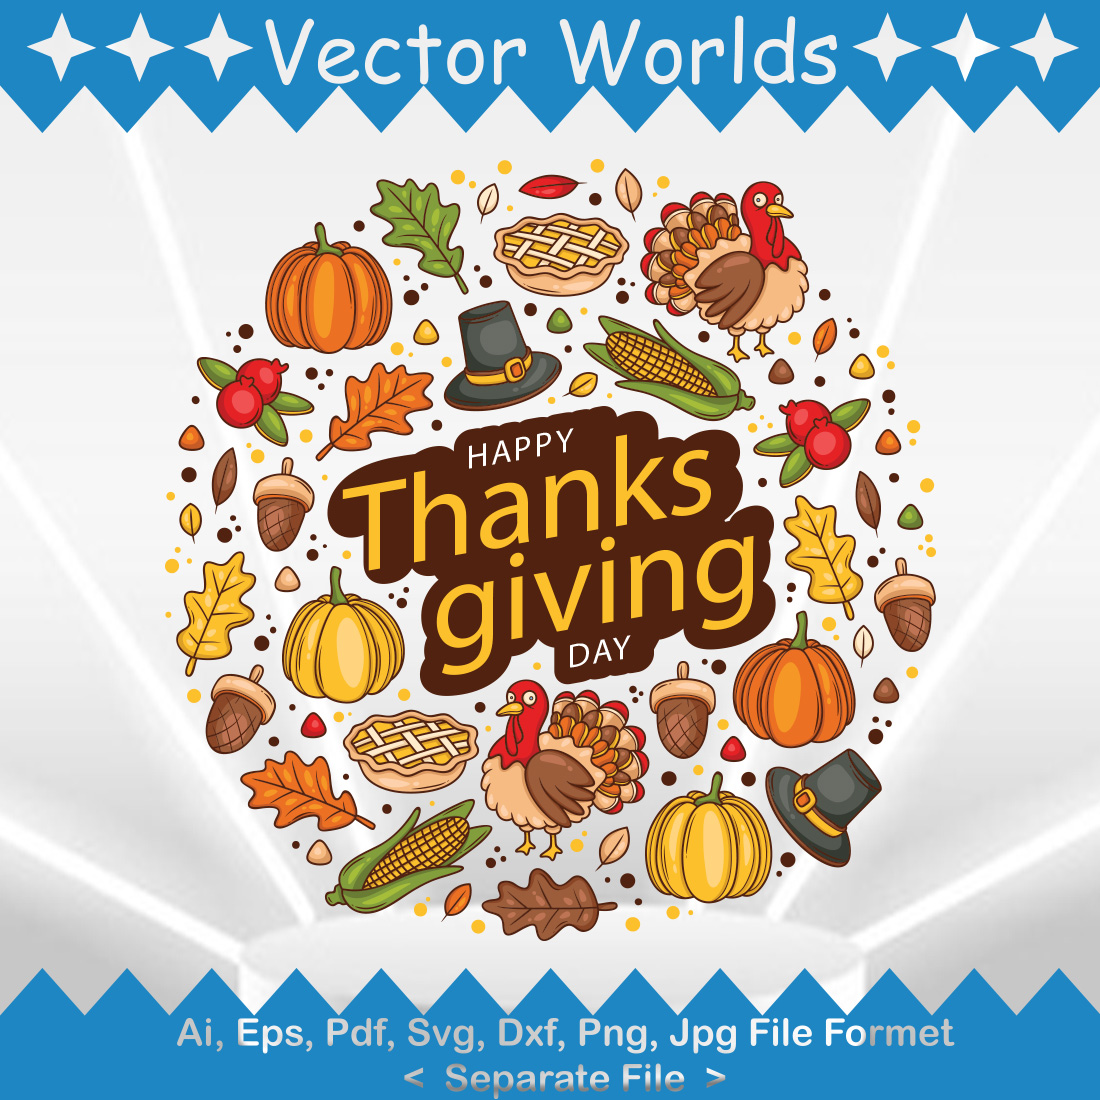 Thanksgiving SVG Vector Design cover image.